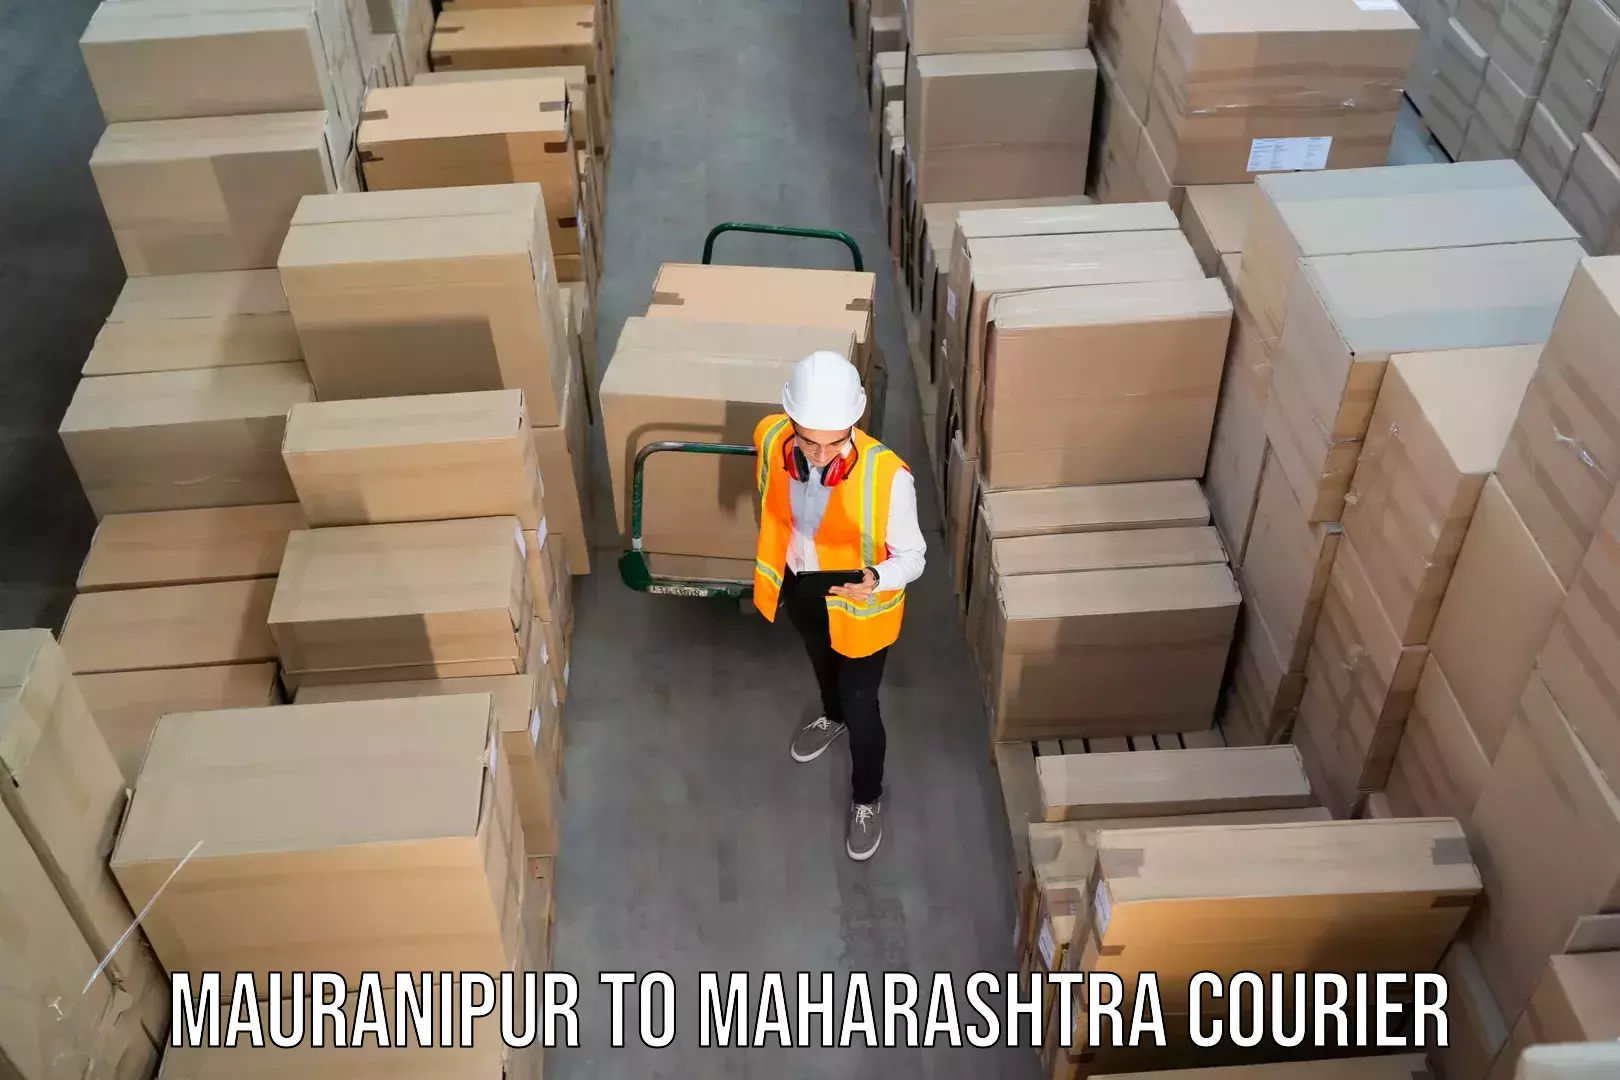 Express delivery capabilities Mauranipur to Ahmednagar